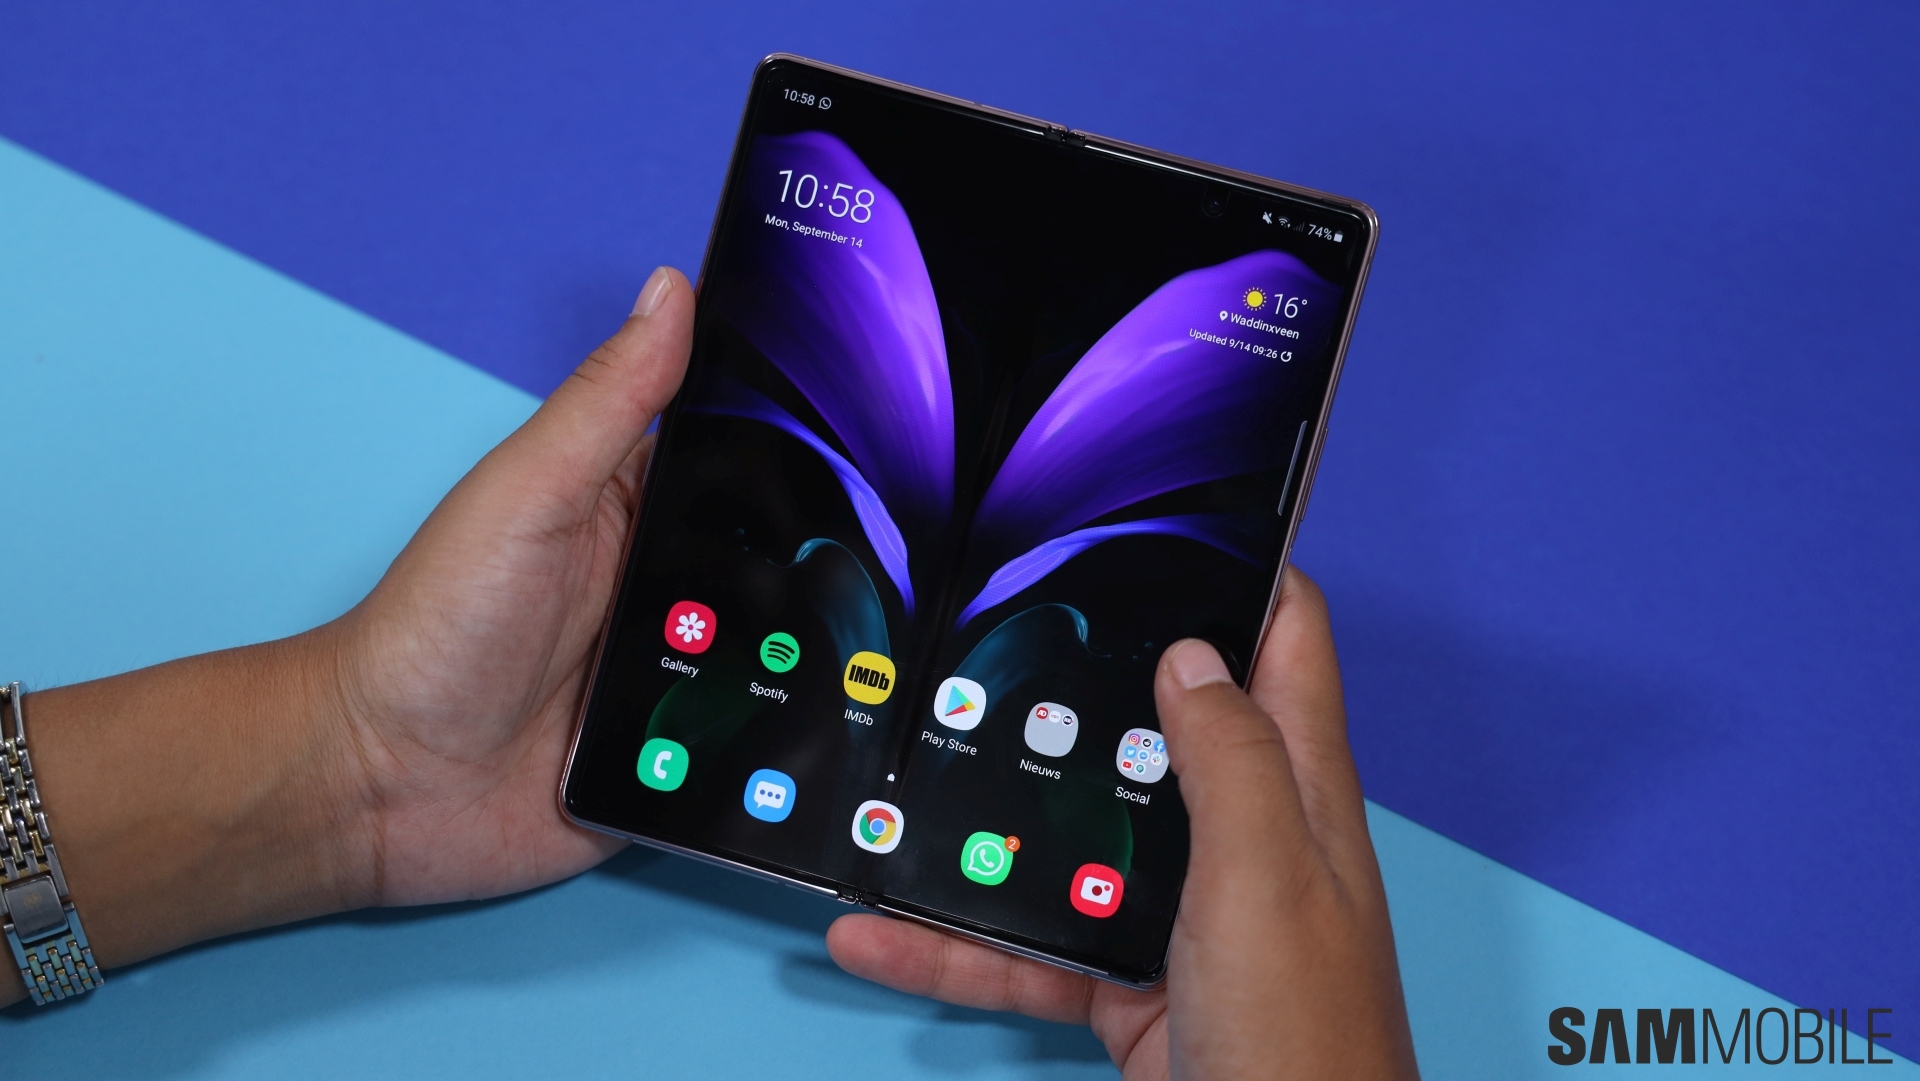 Video] Galaxy Note 10/Note 10 Plus hands-on: Samsung's 1-2 punch - SamMobile